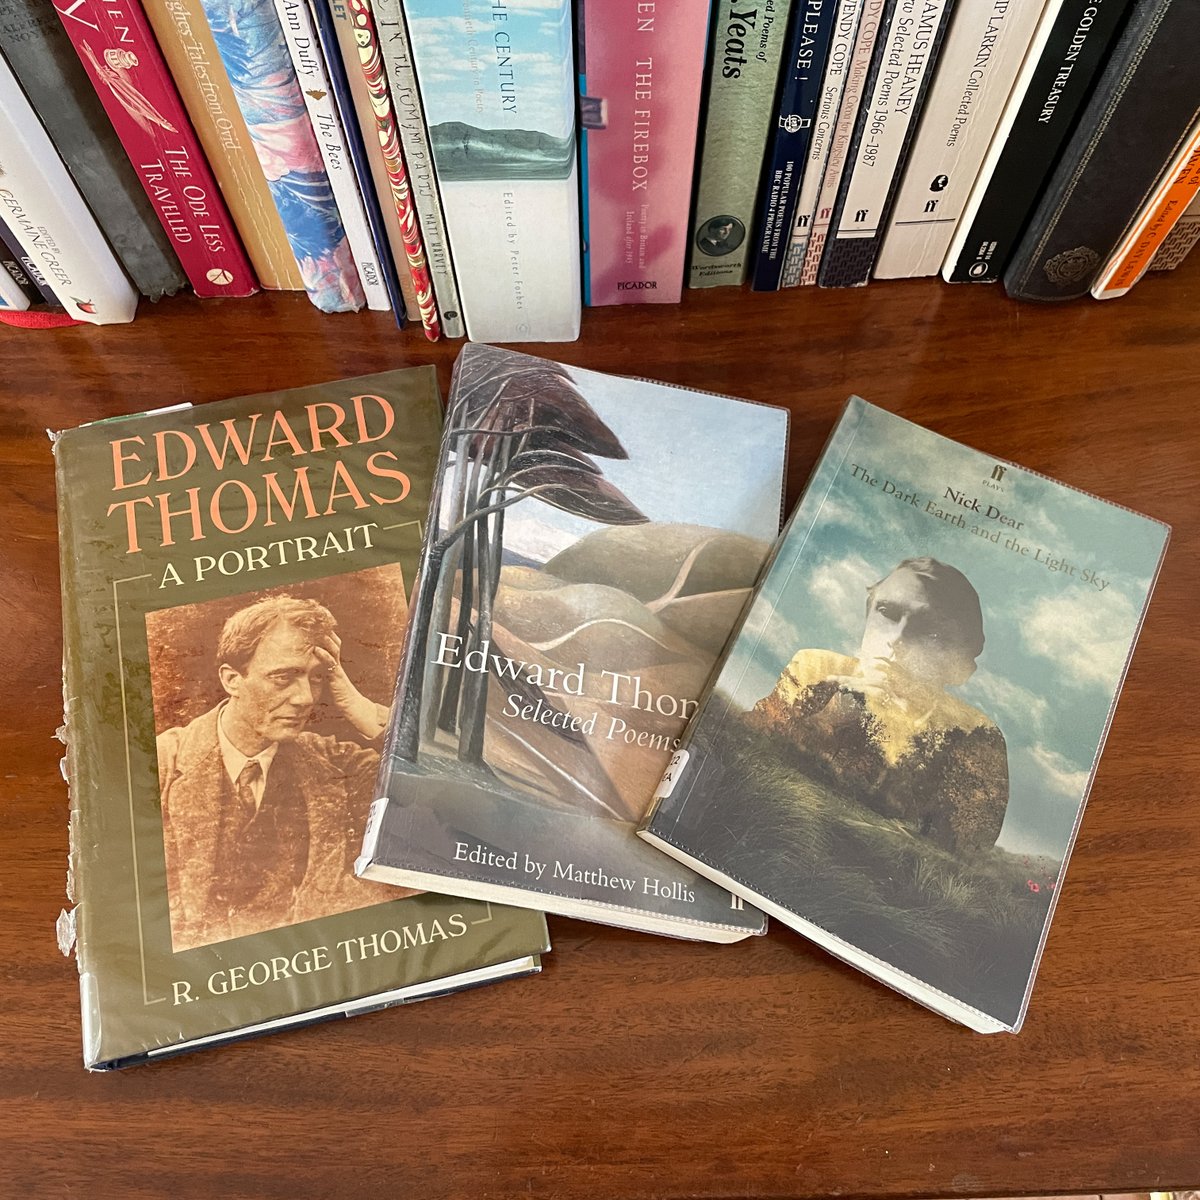 After a blissful weekend staying in the grounds of The Bee House where Edward Thomas wrote many of his poems, and wandering through spring flowers to his memorial stone, I’m having an #EdwardThomas moment. Thanks for the books @warkslibraries #AshfordHangers #ShoulderOfMuttonHill